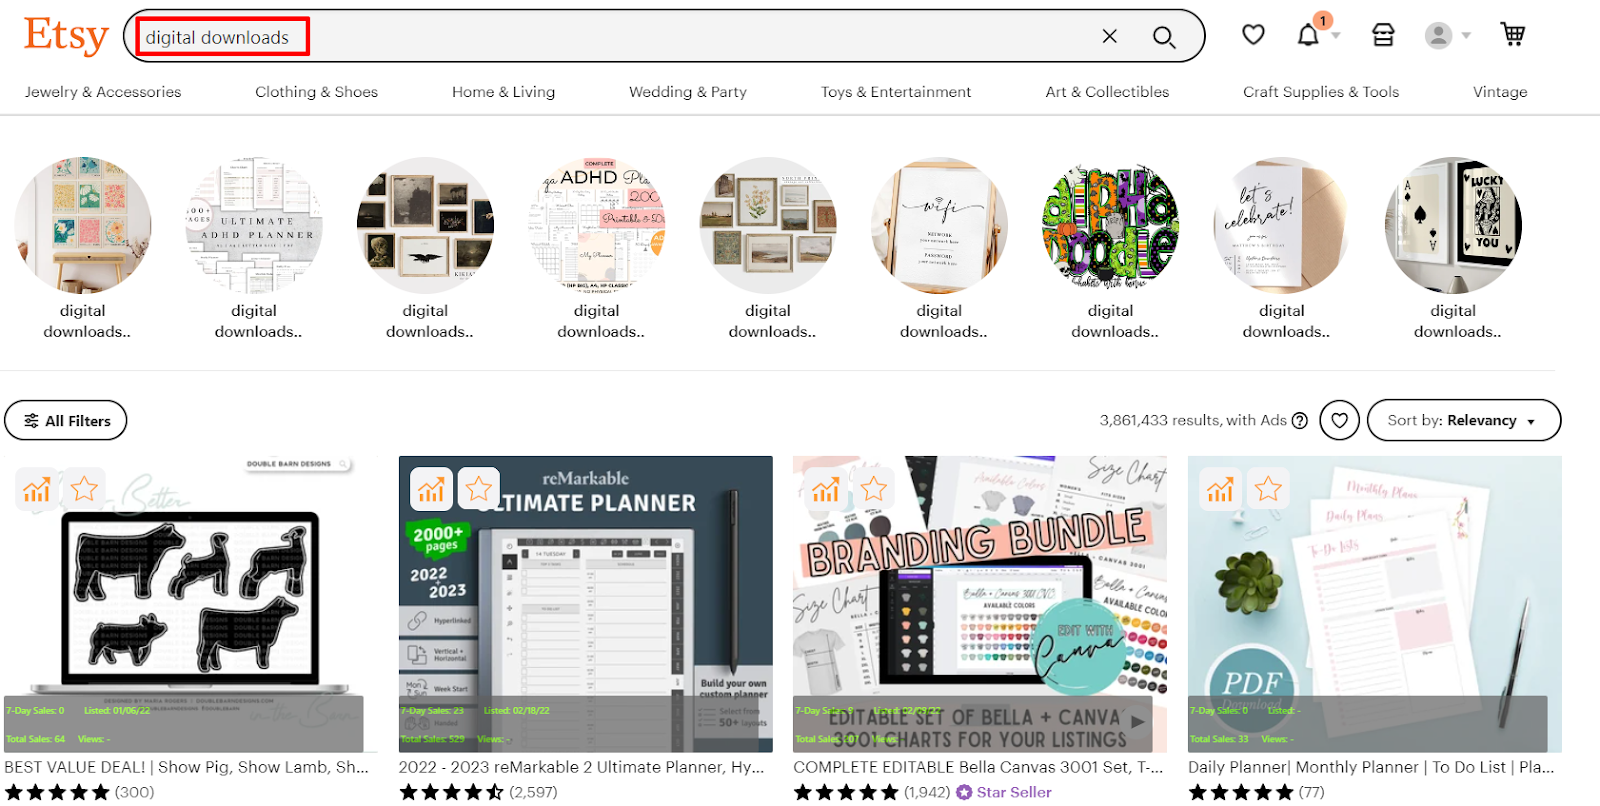 best platform to sell digital products - etsy